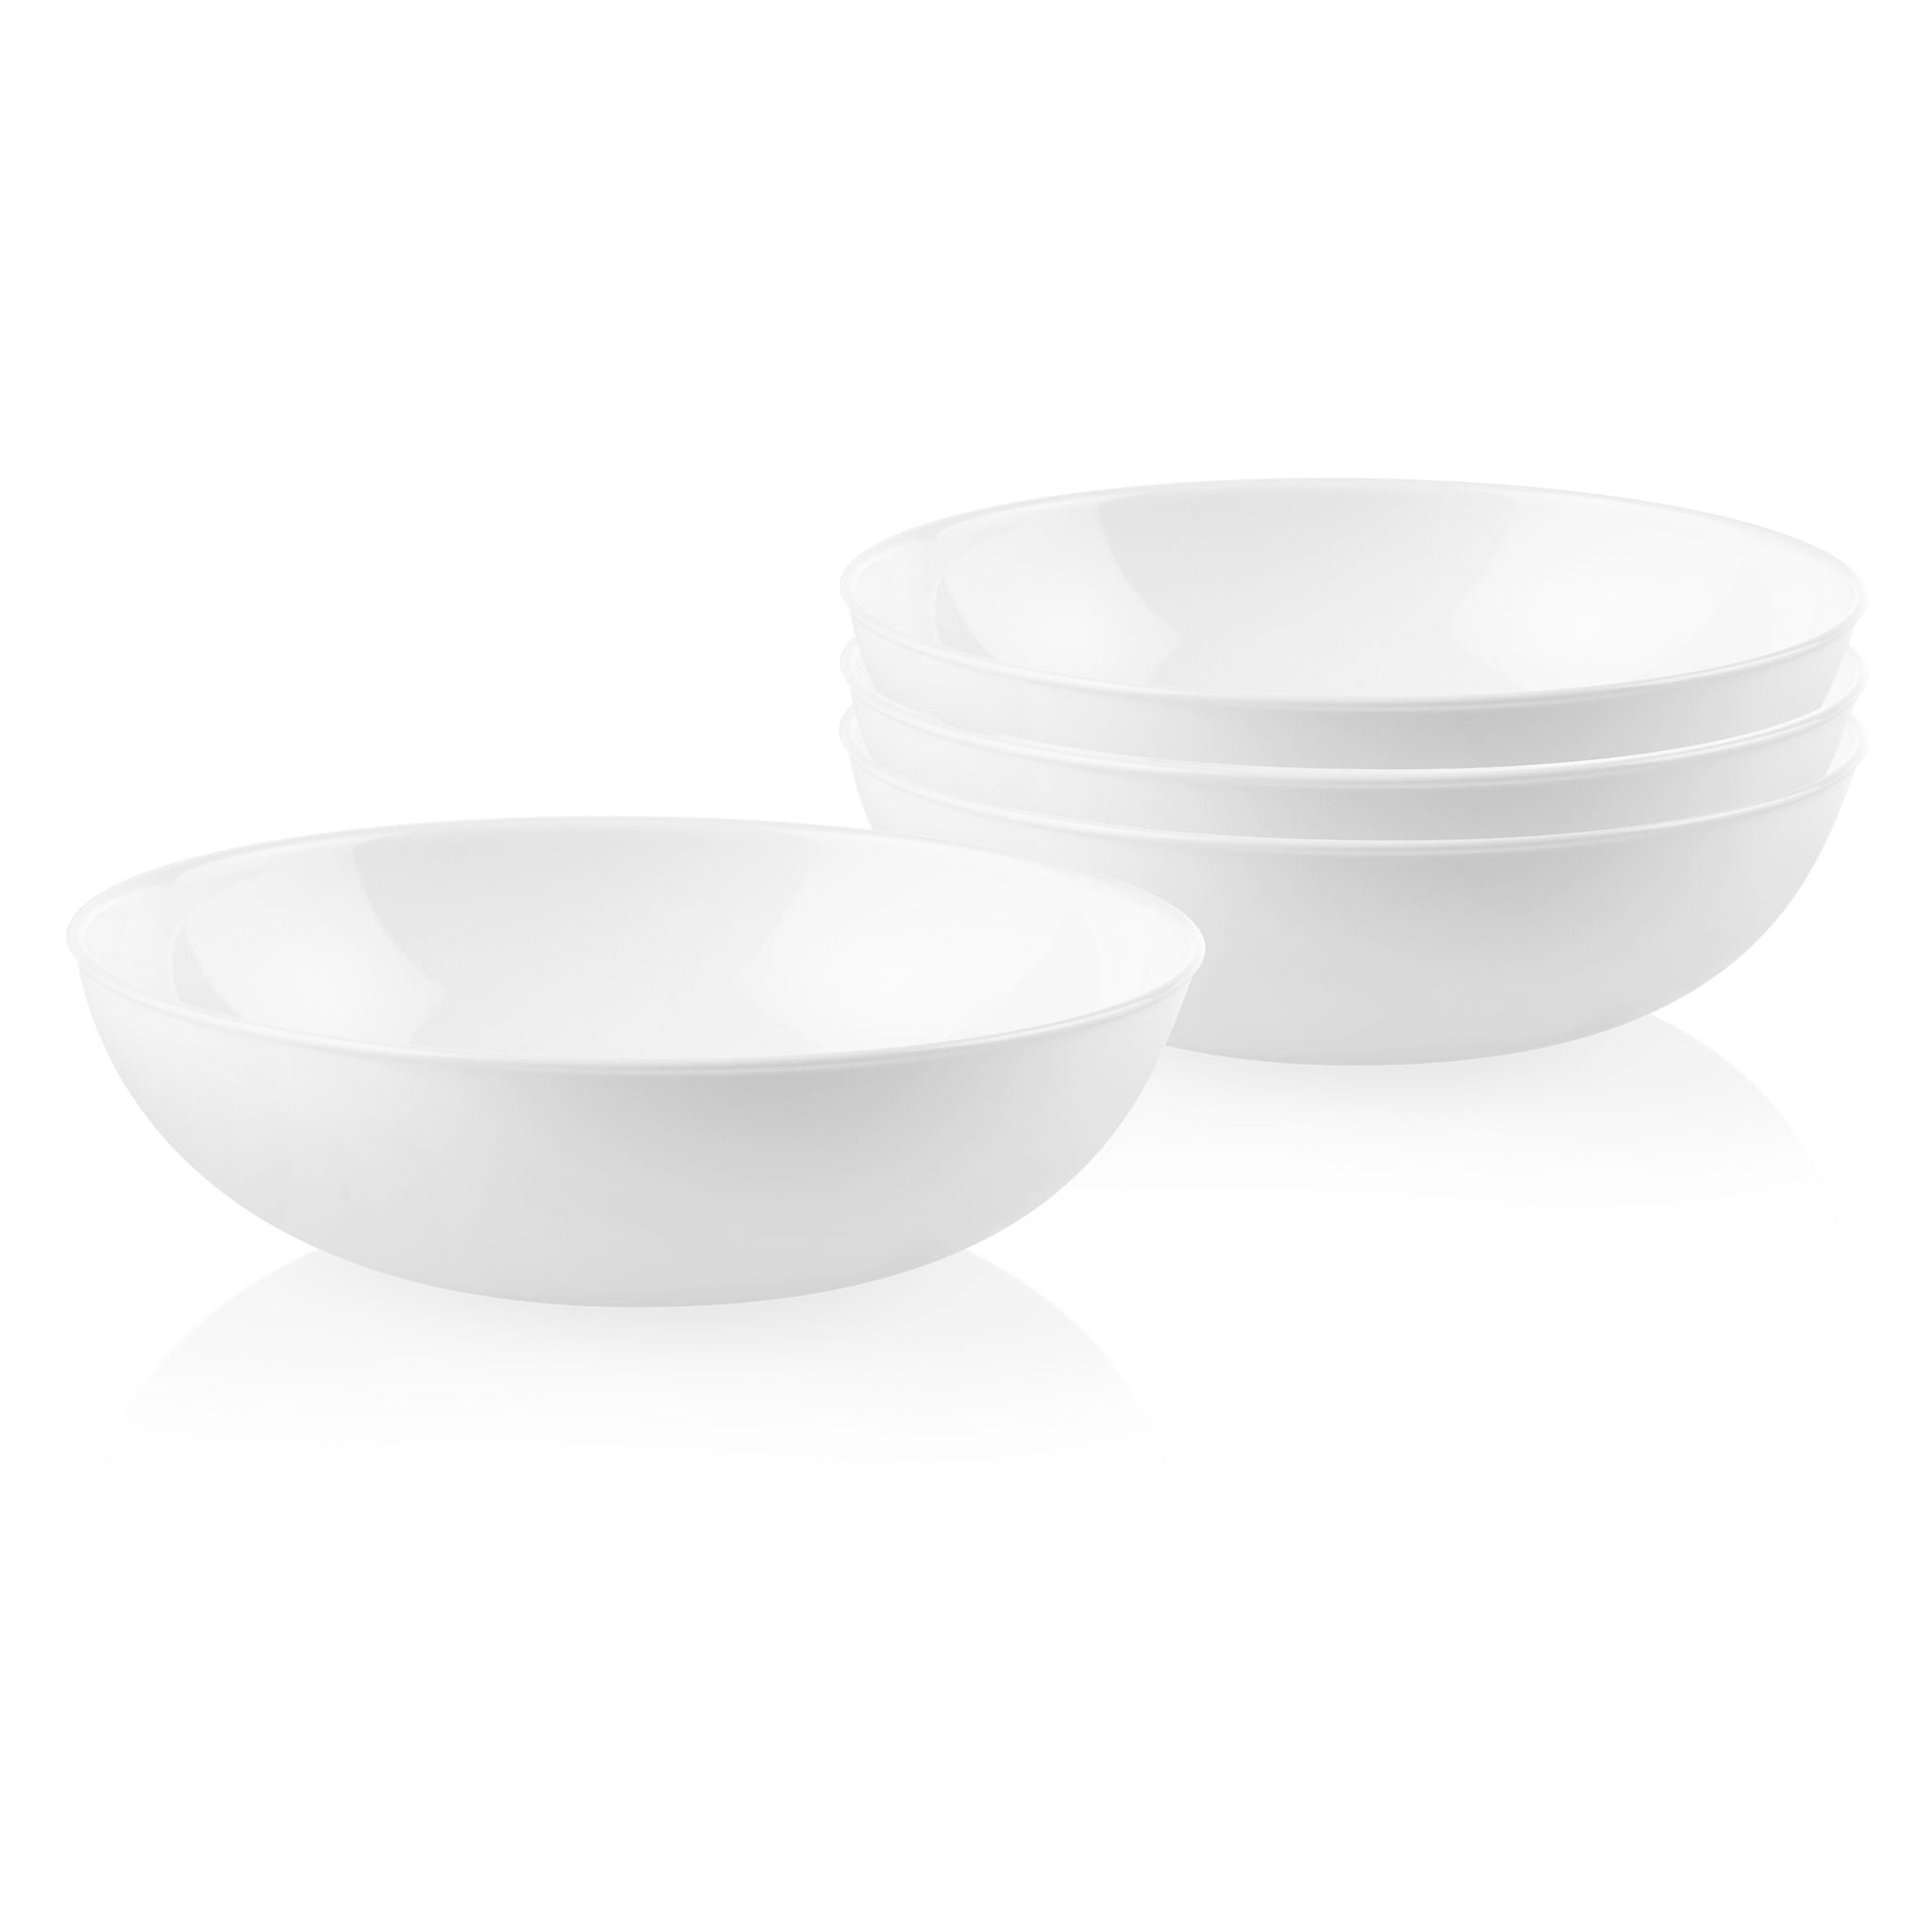 Winter Frost White 30-ounce Versa Meal Bowls, 4-pack